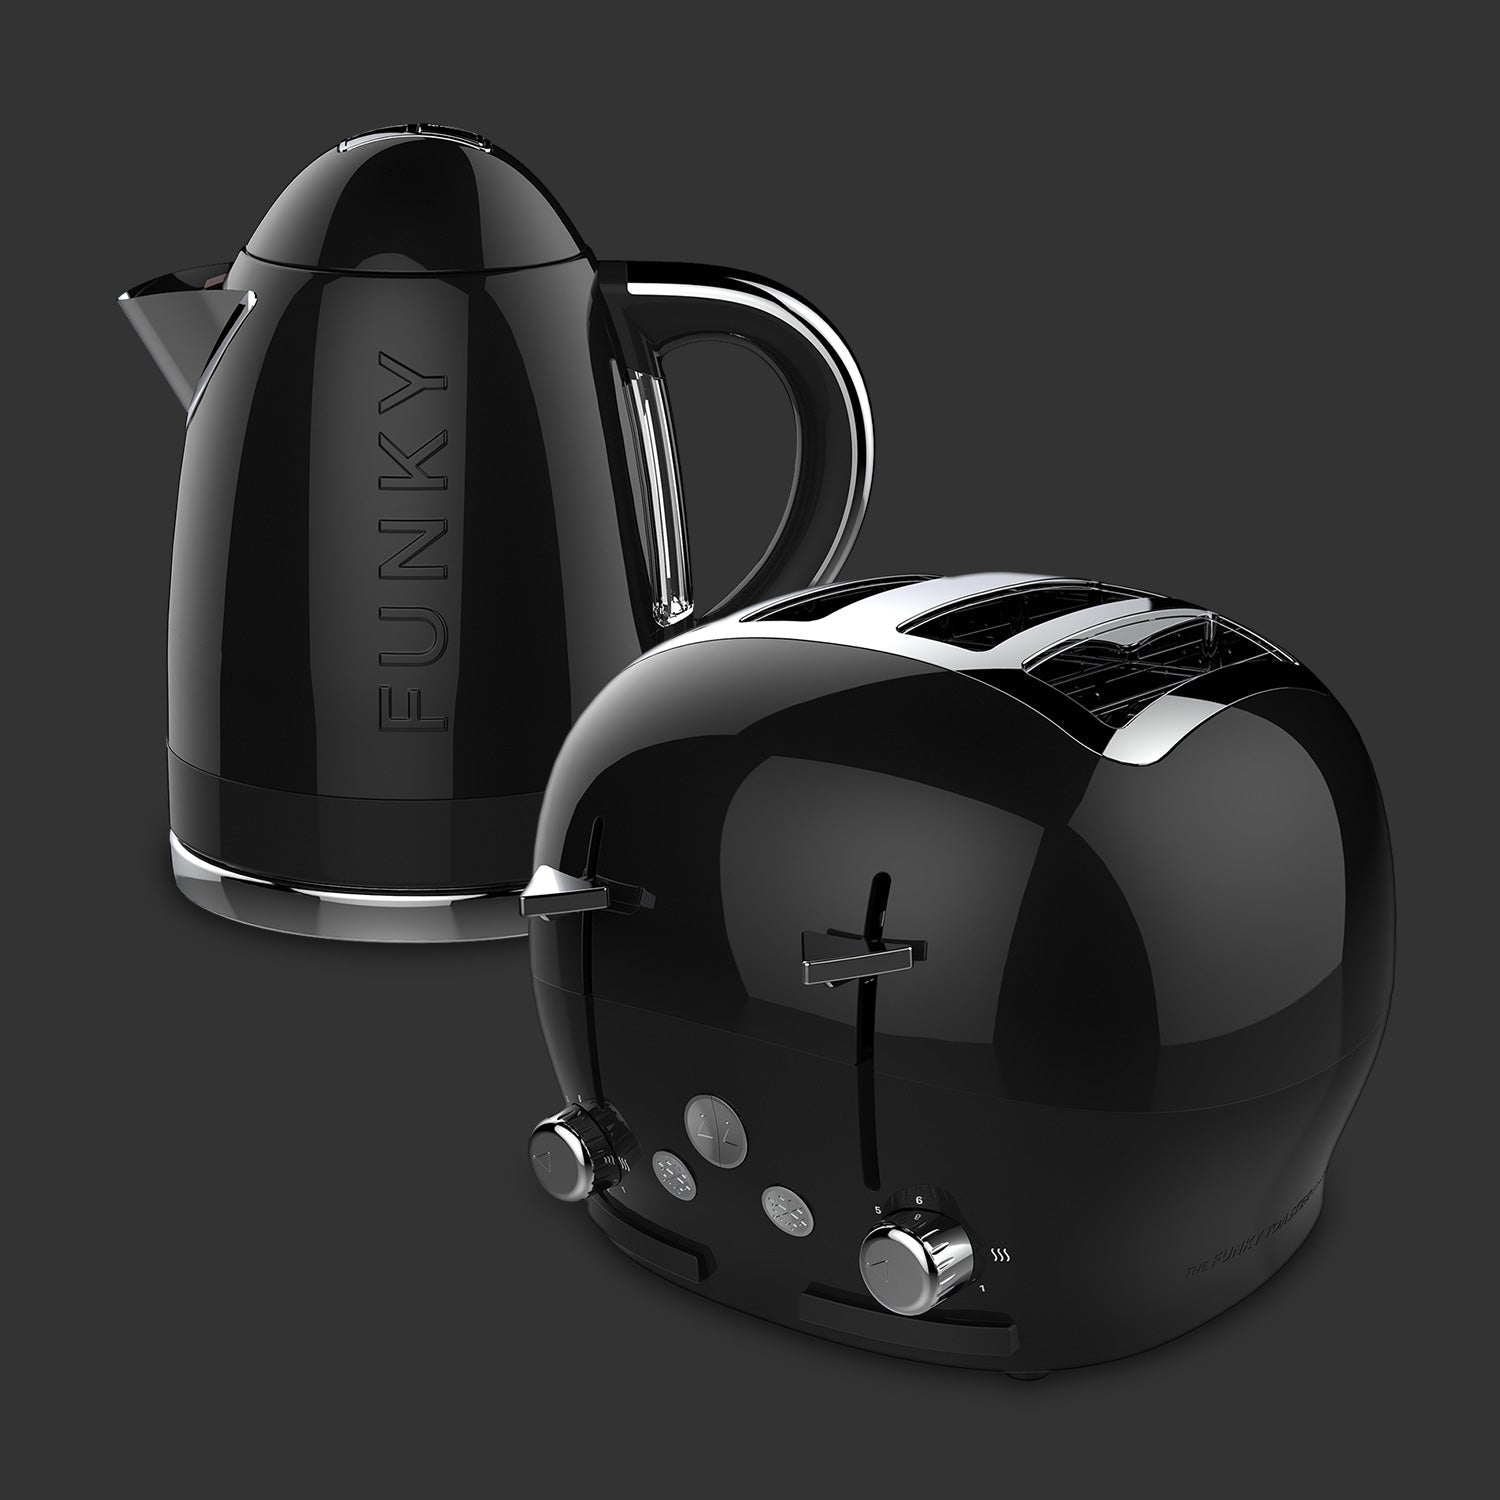 Black Funky Kettle and 4-Slice Funky Toaster (Grade A) Set